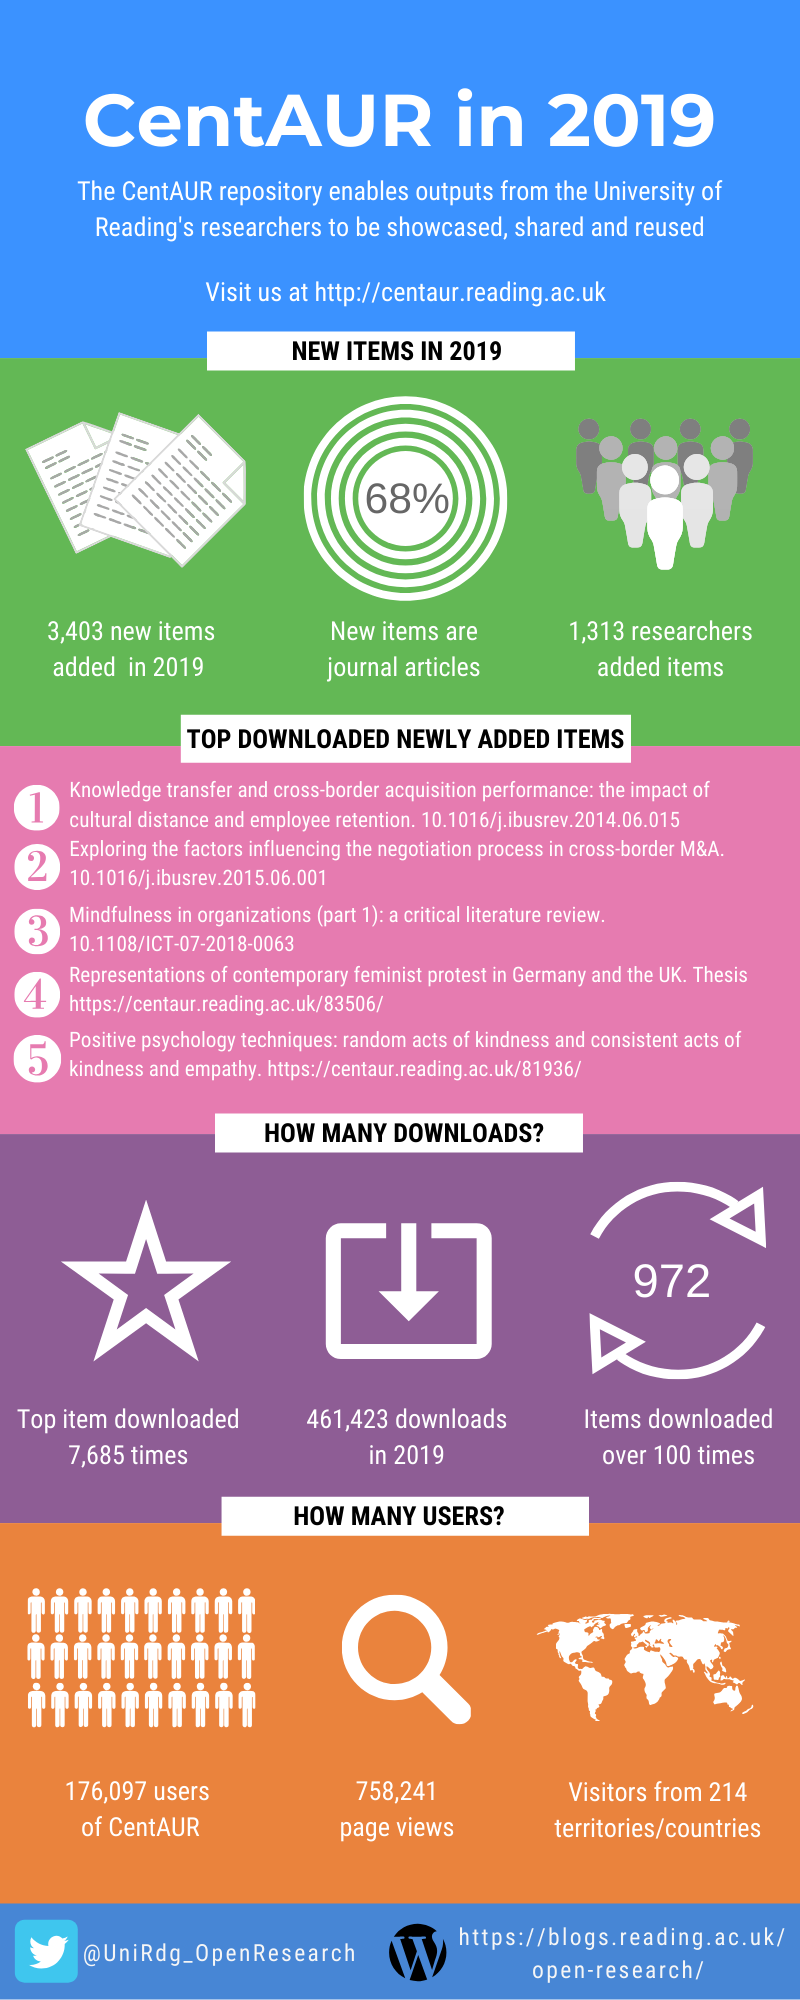 Infographic with key statistics from the repository